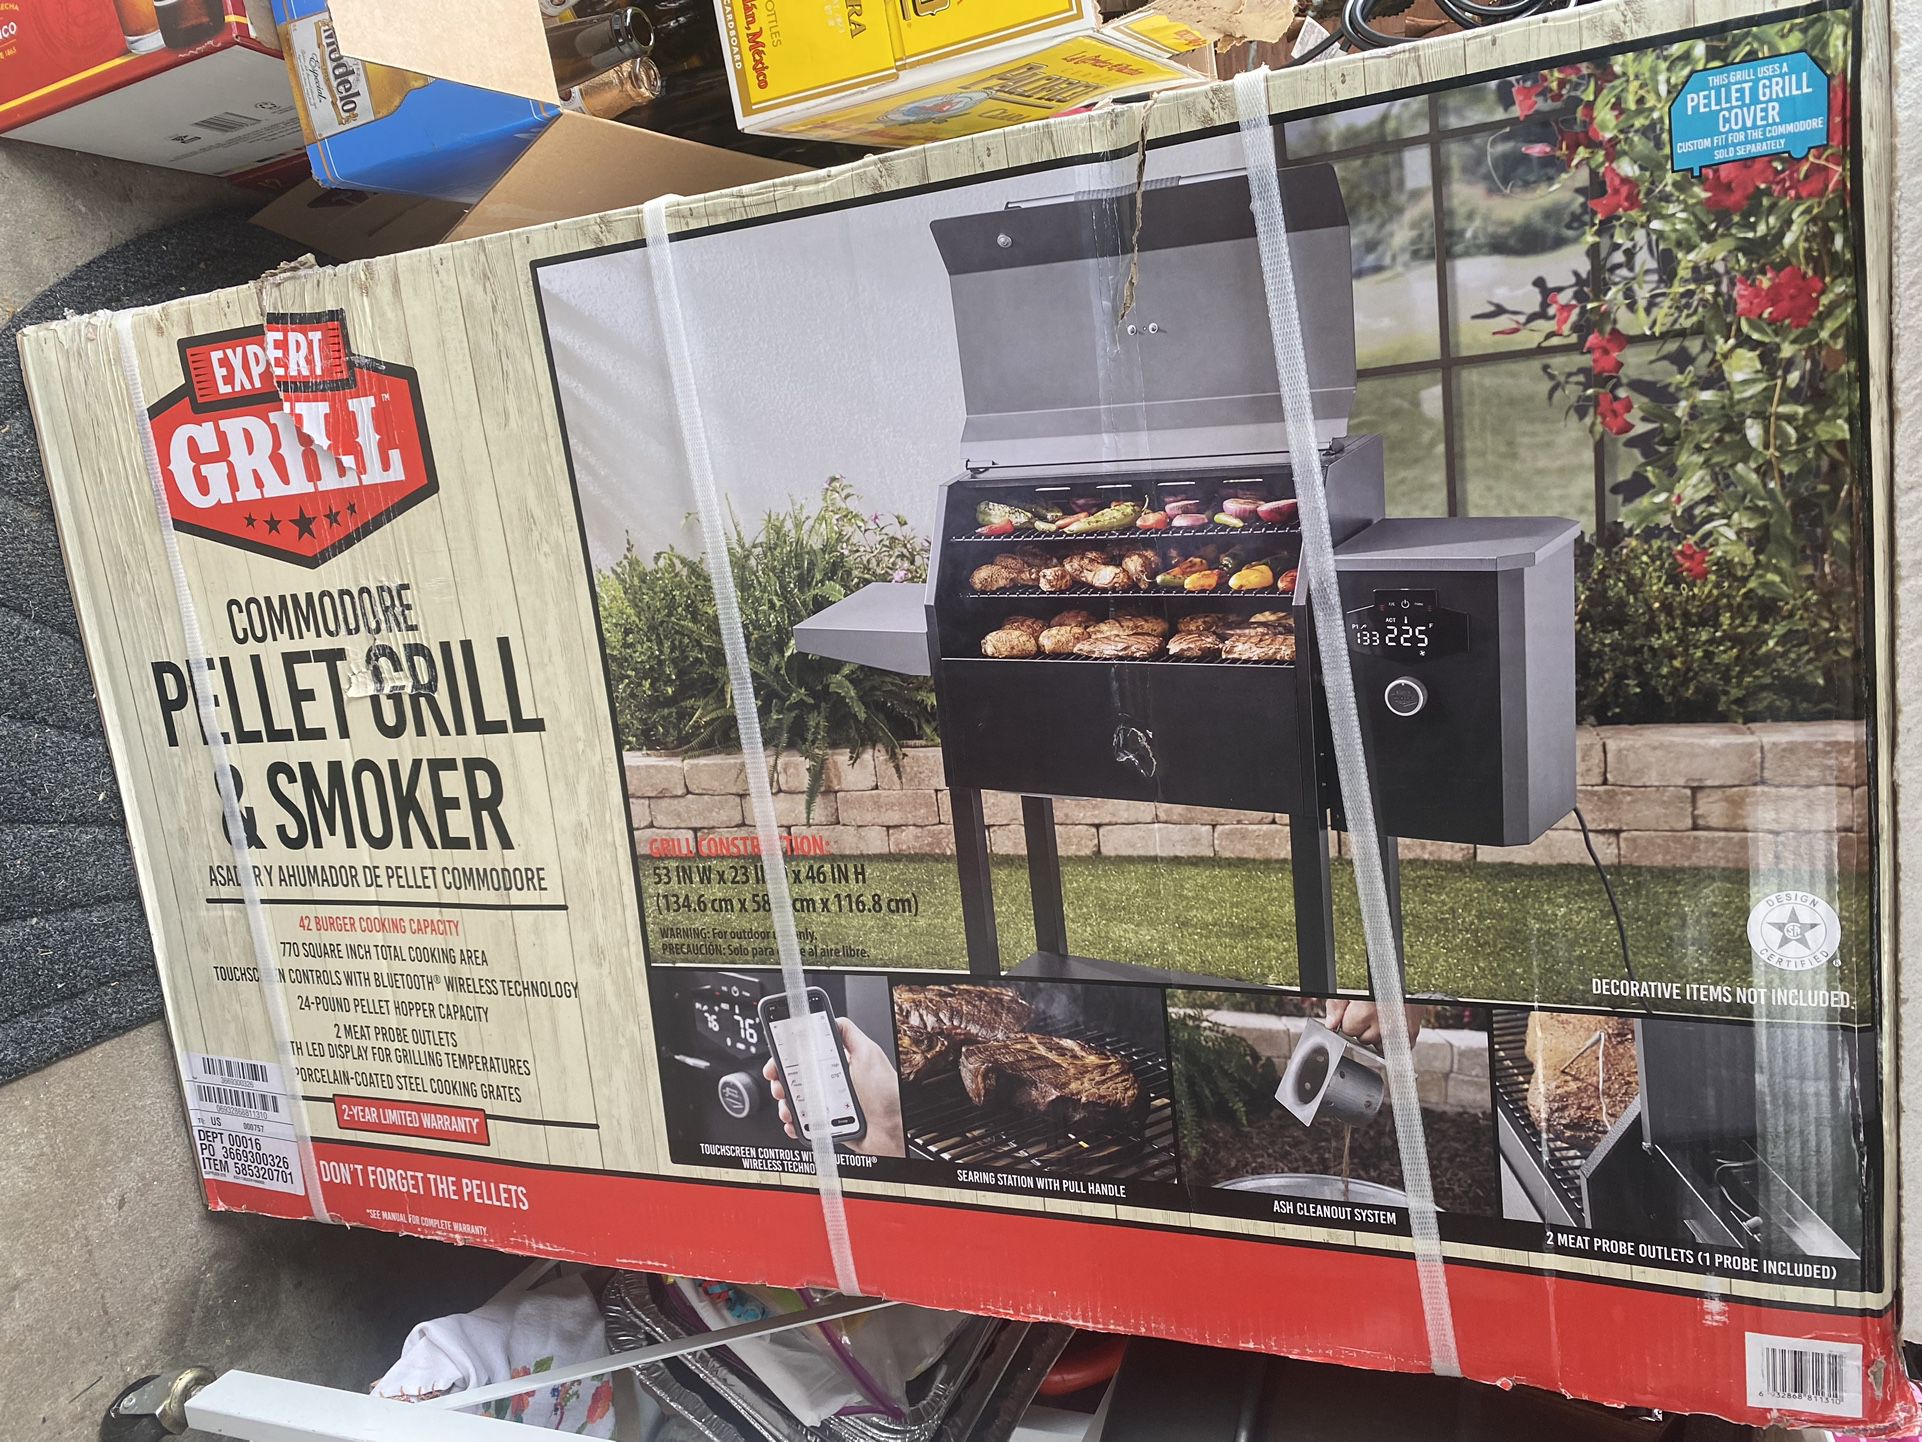 Got an Expert Commodore Pellet Grill and Smoker for free. It was